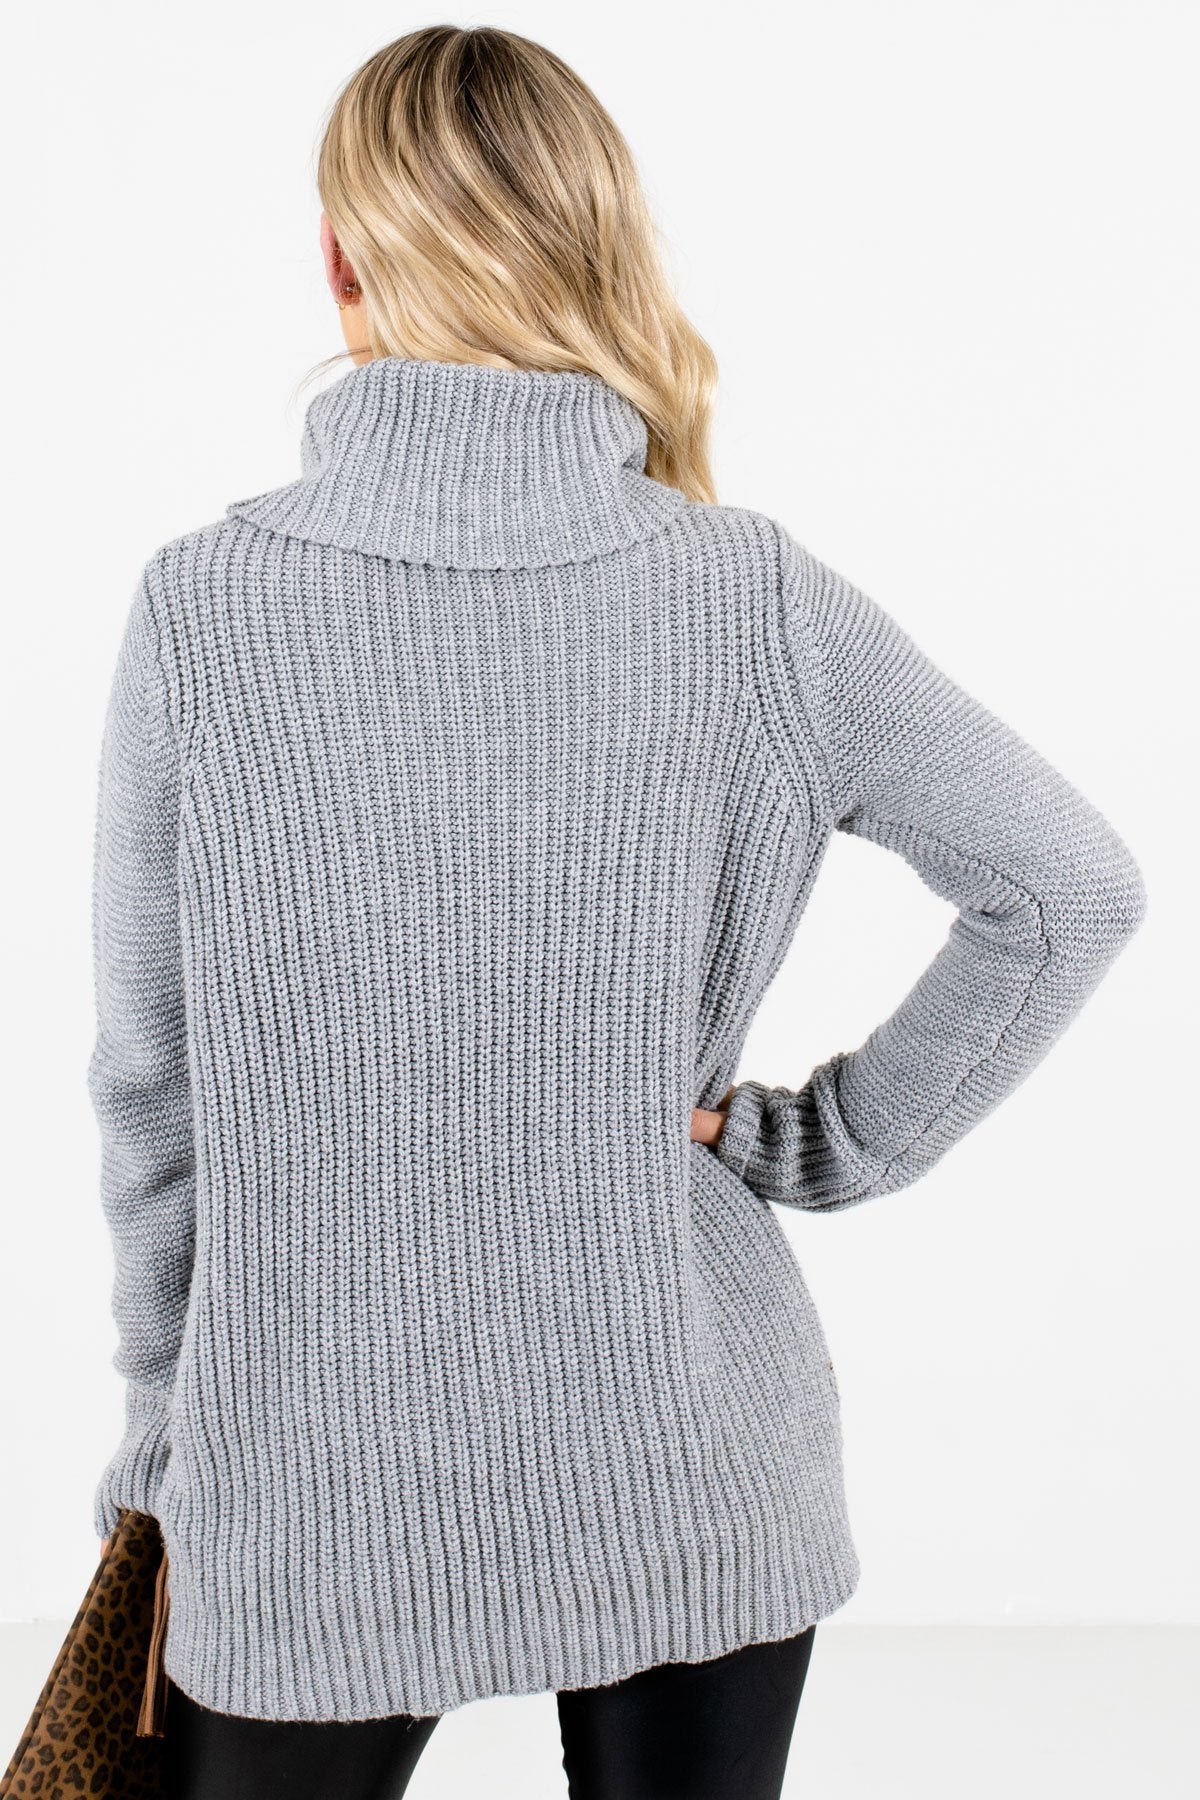 Women's Gray Cowl Neck Style Boutique Sweater